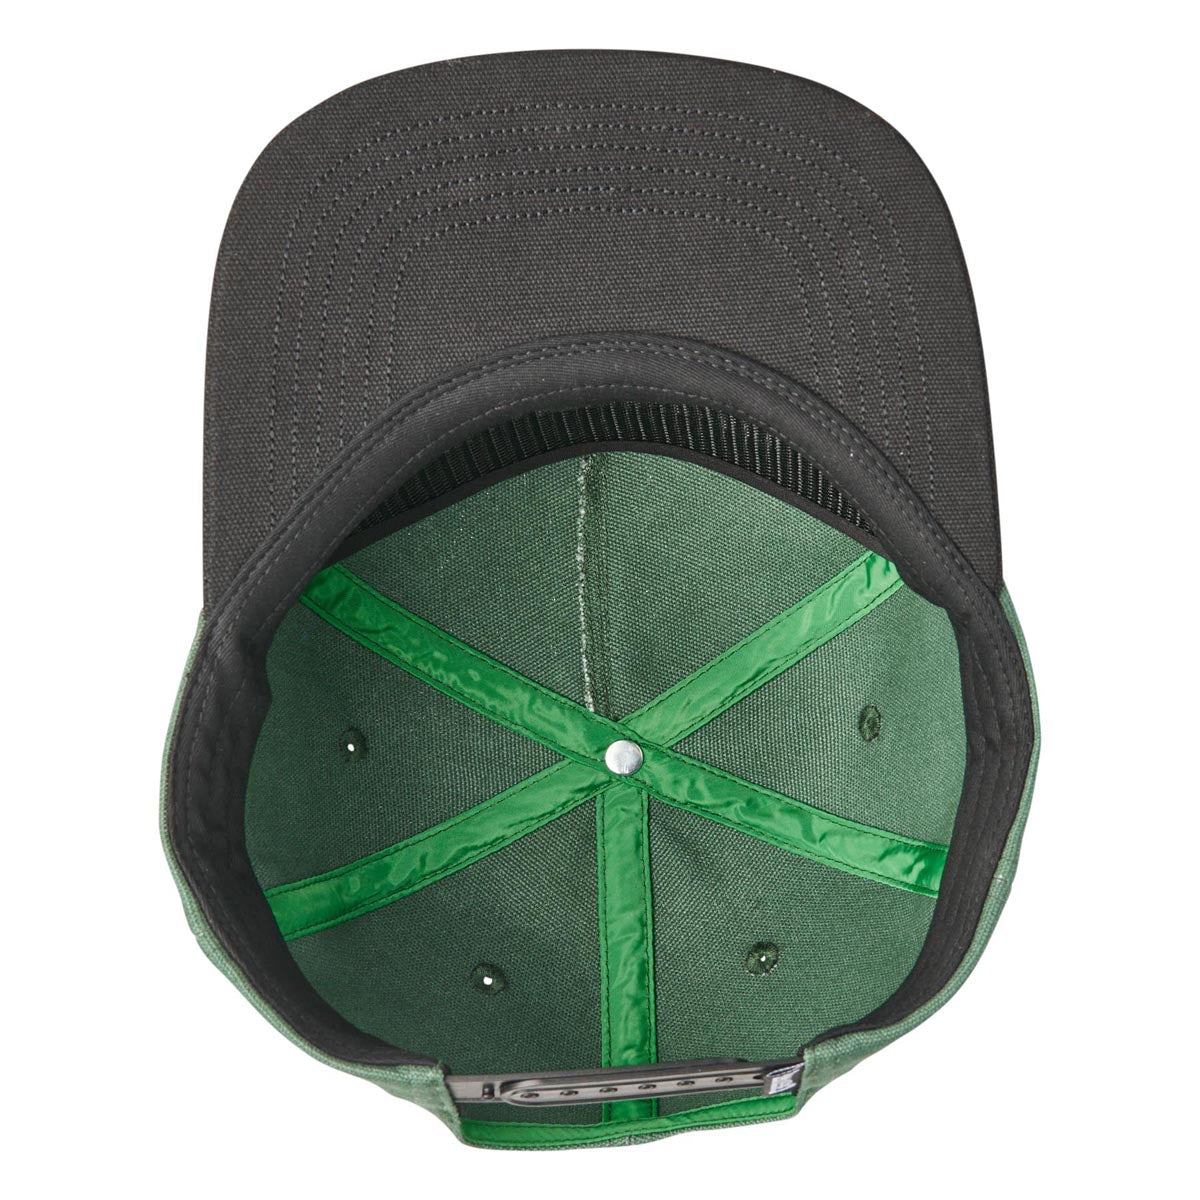 Creature Rolling In The Grave Snapback Hat - Dark Green/Black image 5